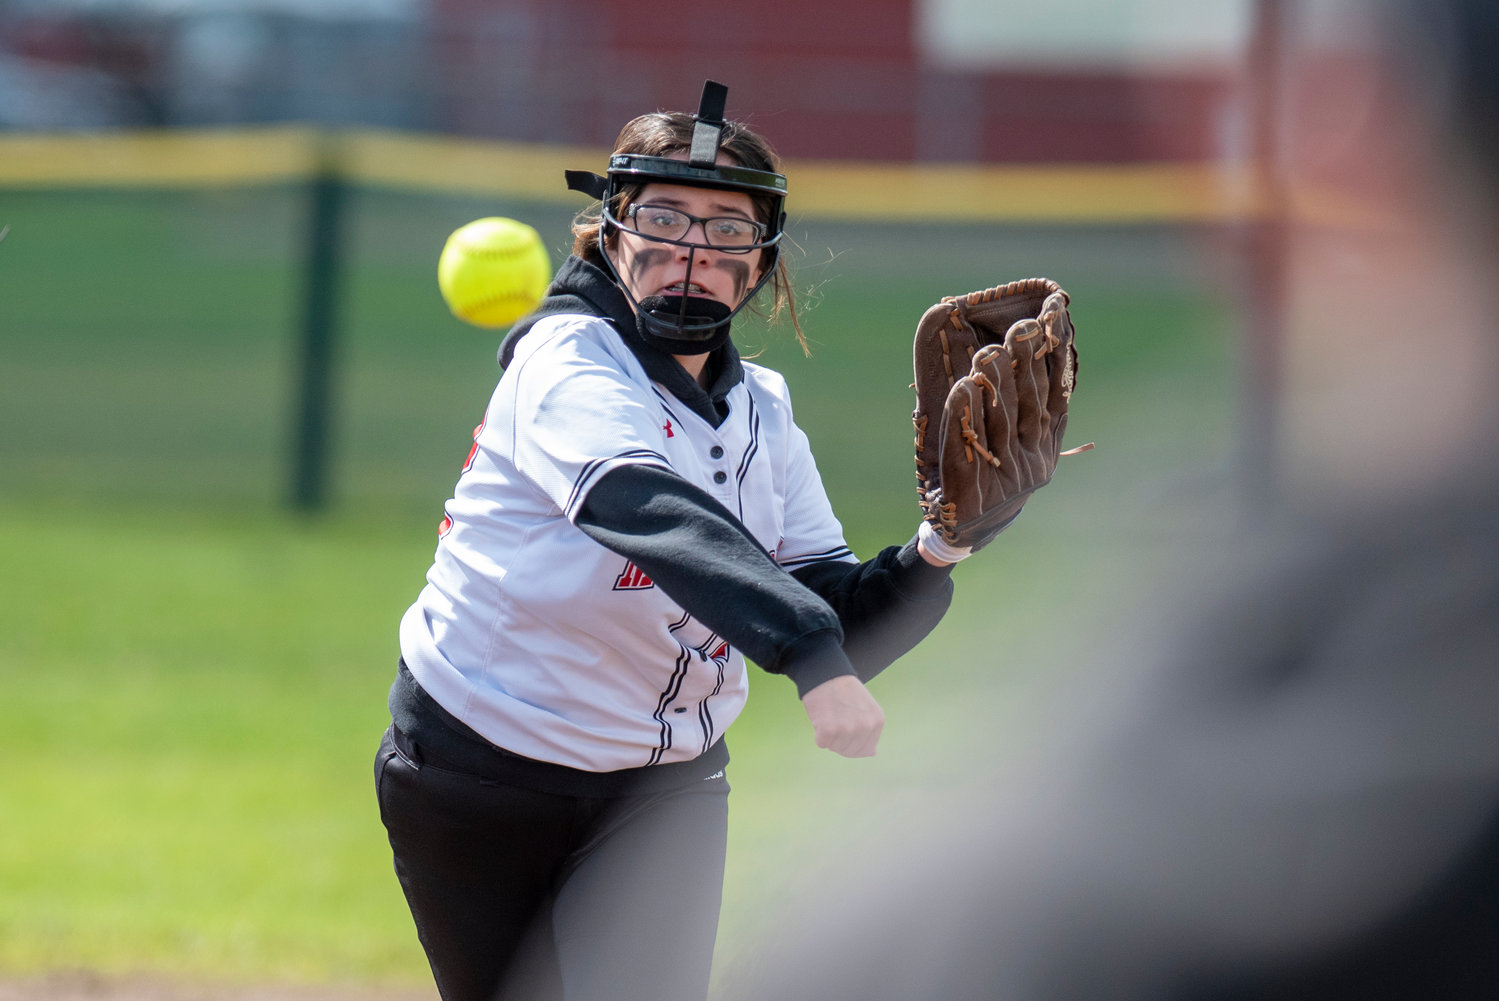 Mossyrock second baseman Kimberly Villalba makes a throw to first during a road game against Onalaska on April 15.